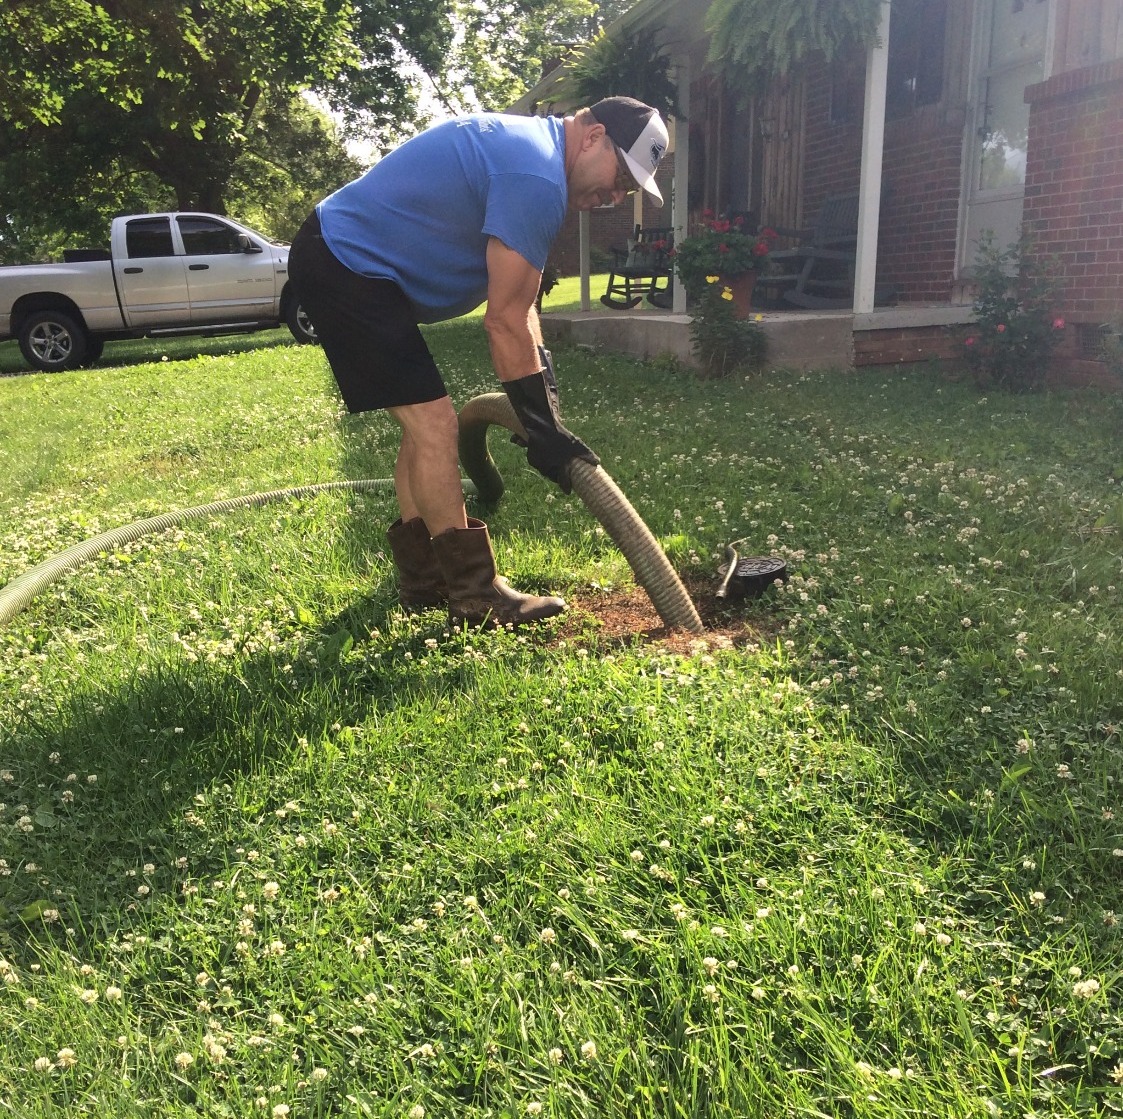 Star Septic Service Star Septic Service Middlesboro (606)248-7134